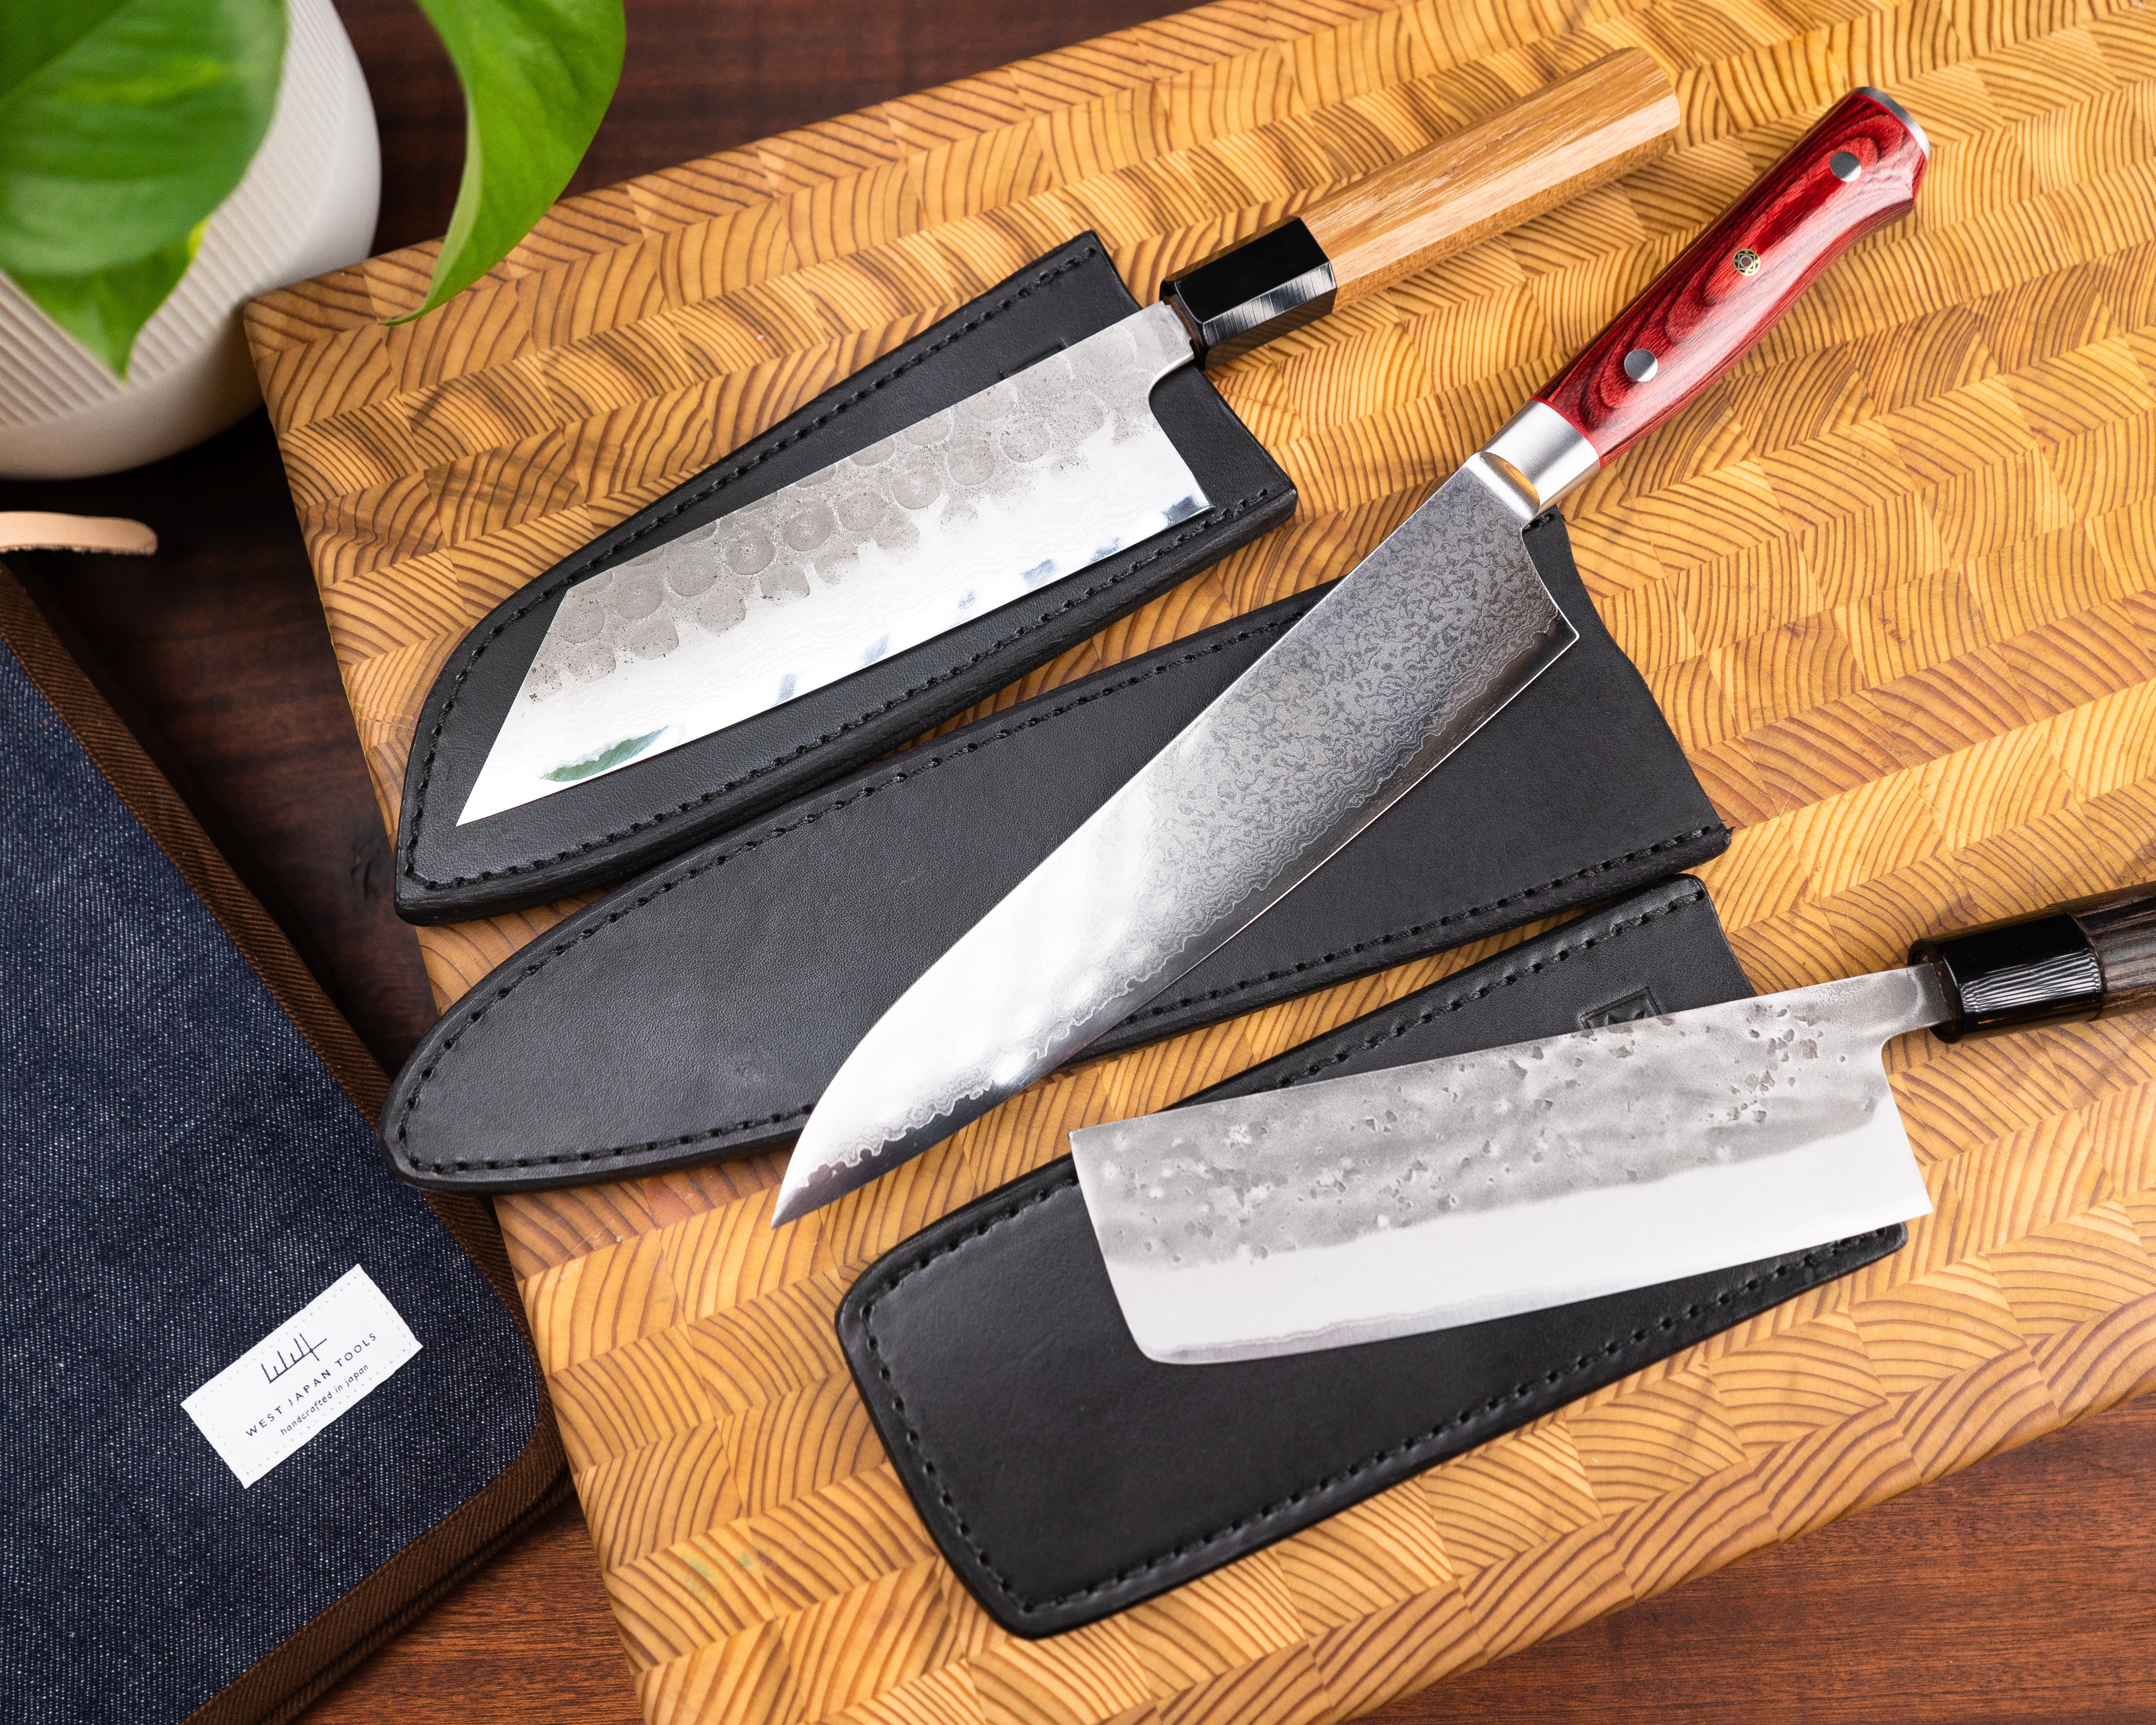 What is The Best No.1 Japanese Chef Knife Brand in Japan?